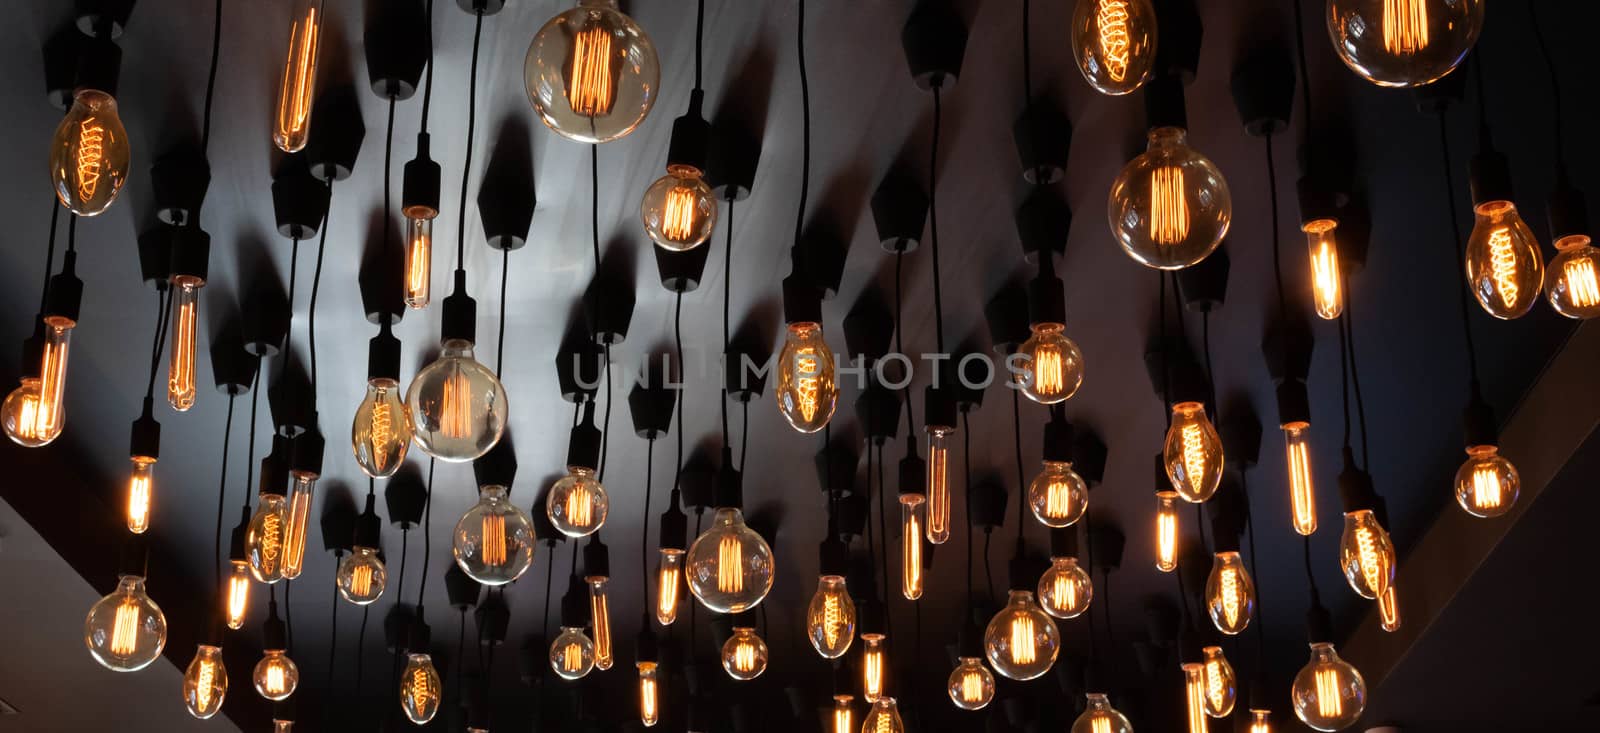 Retro Edison lamp on a black background of the ceiling. Concept idea.